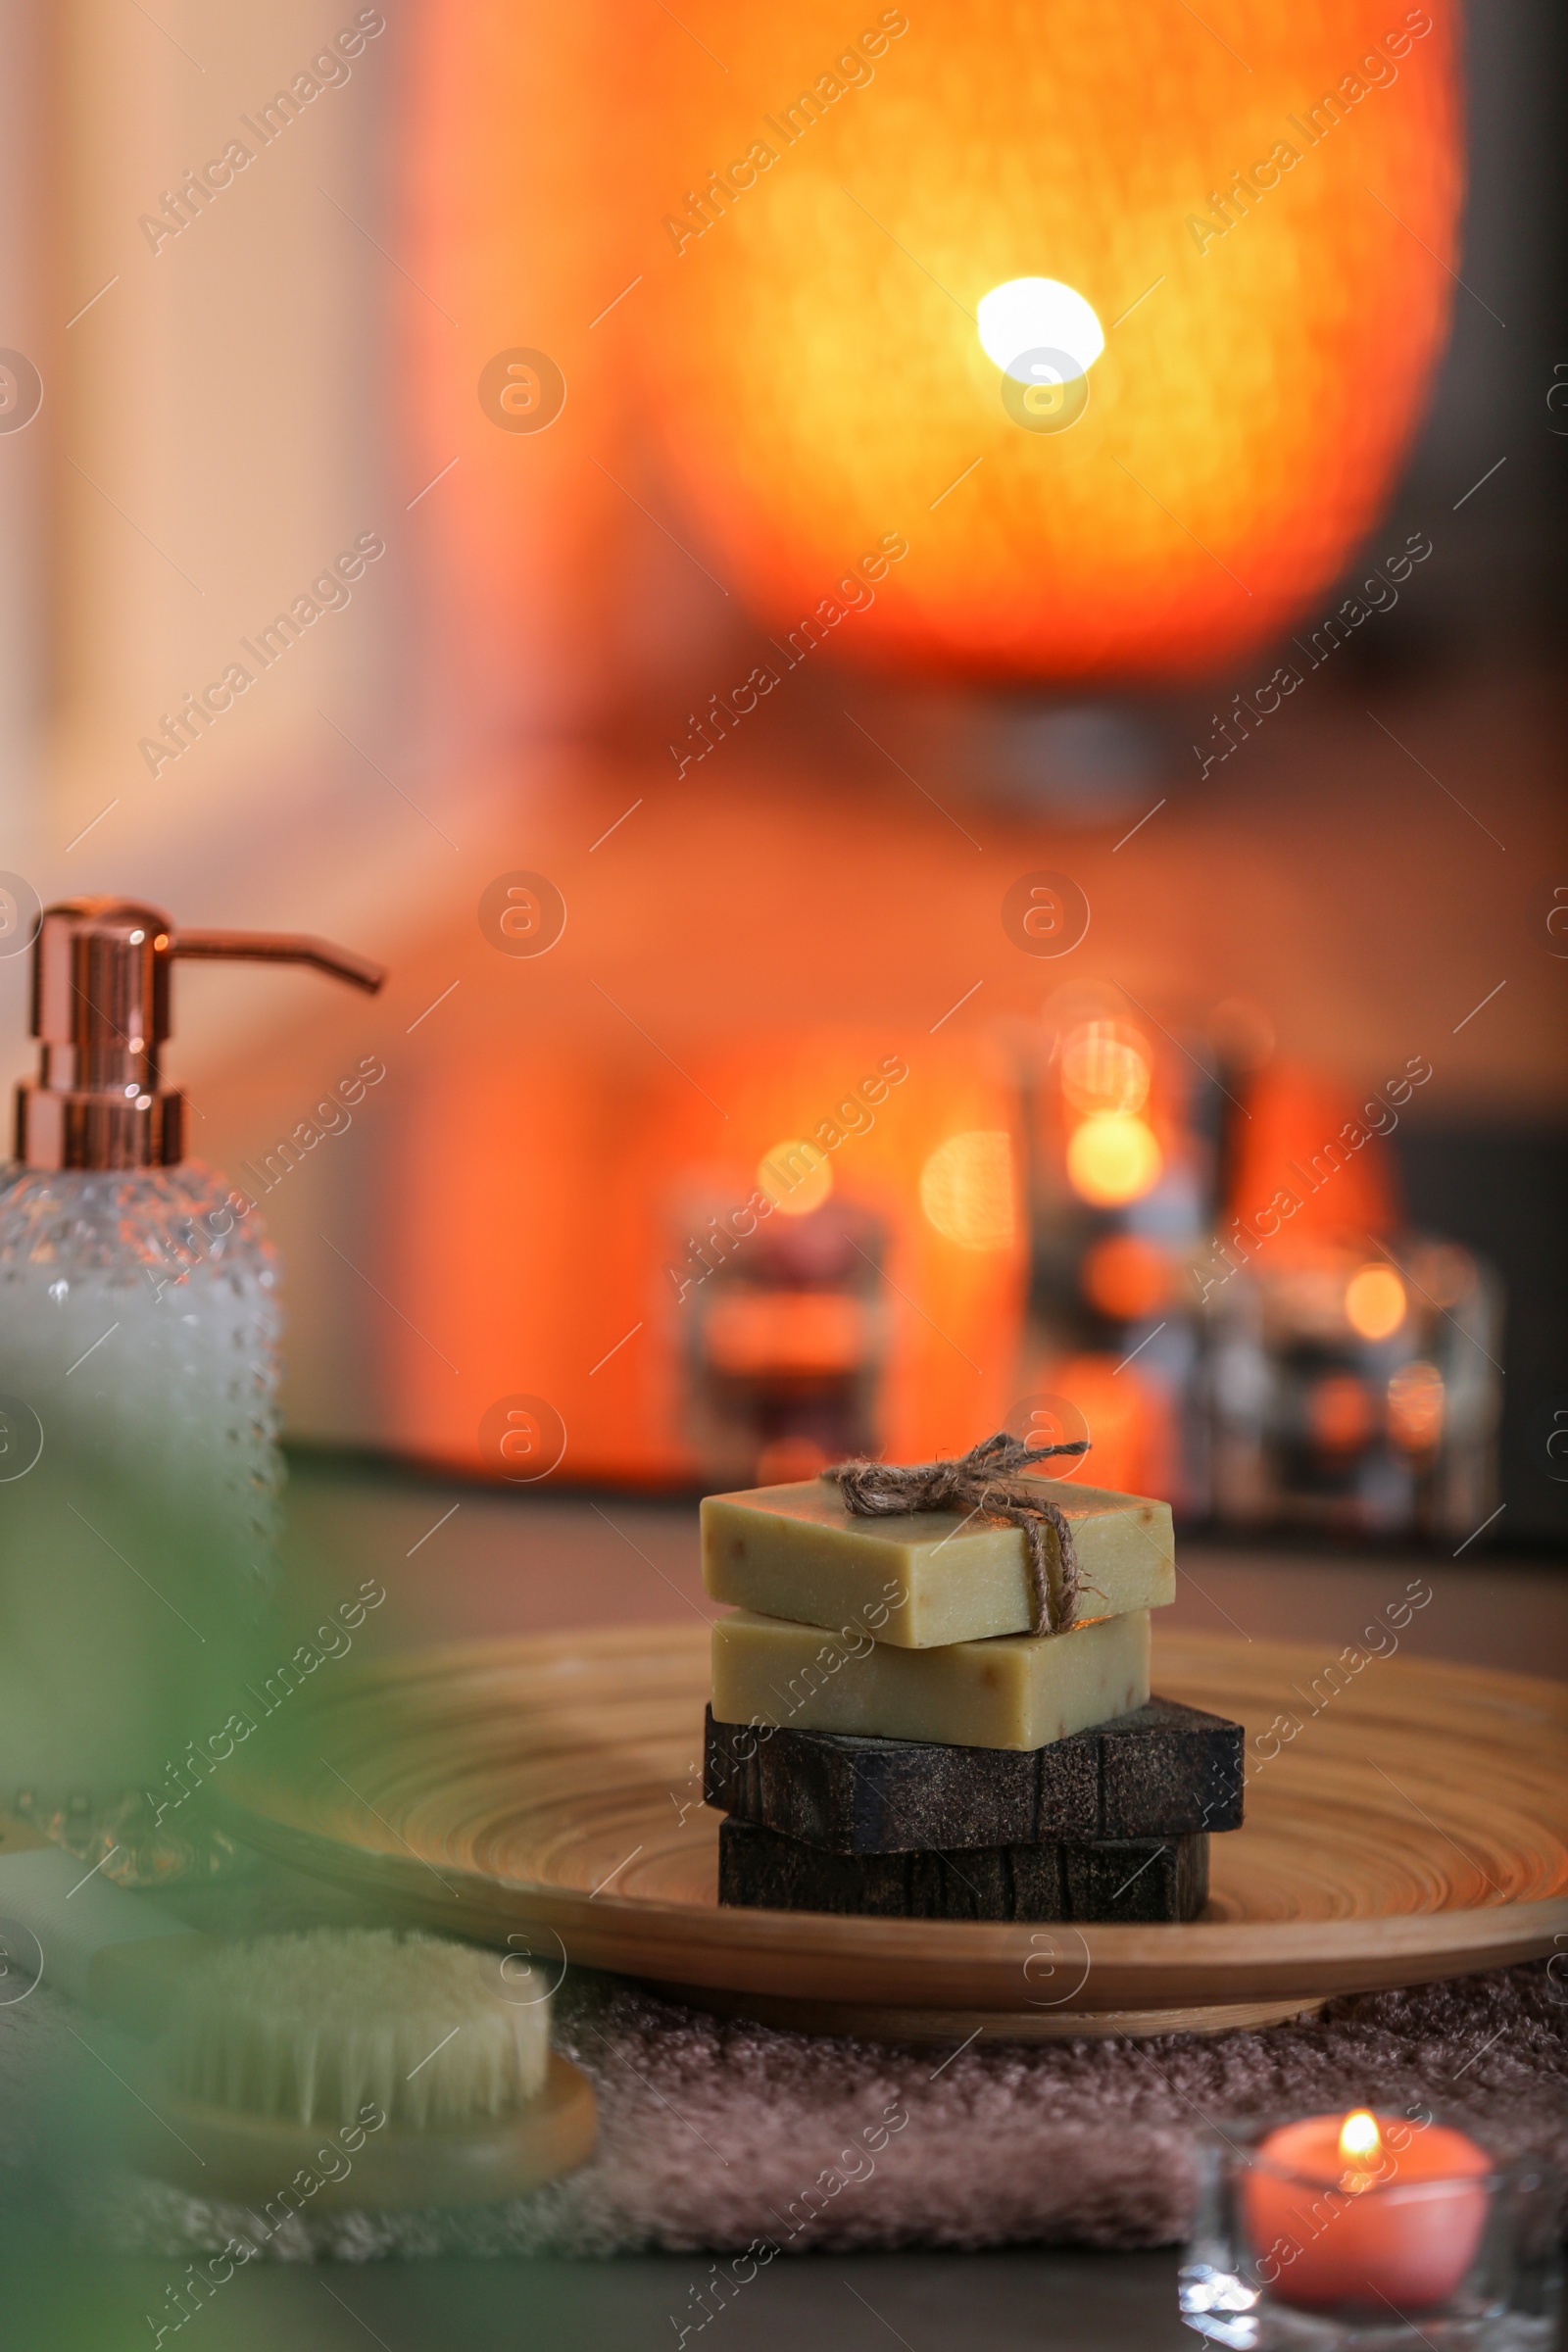 Photo of Dish with soap bars on table against blurred background. Space for text